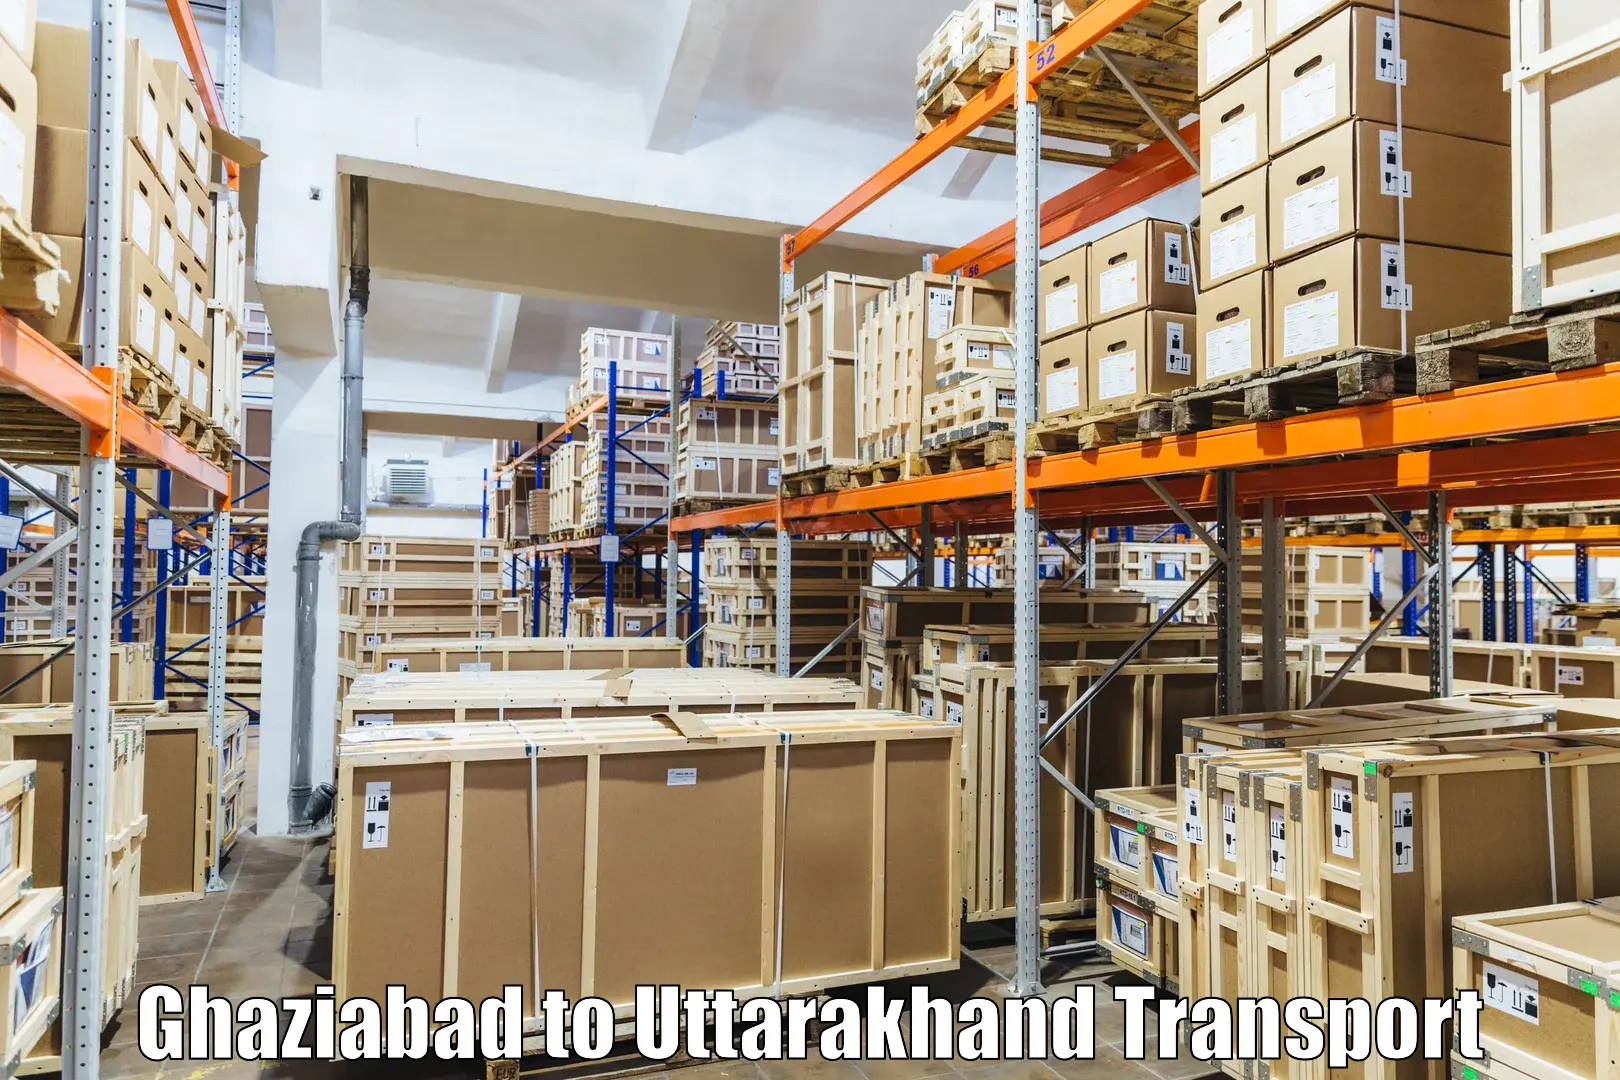 Lorry transport service in Ghaziabad to Haridwar